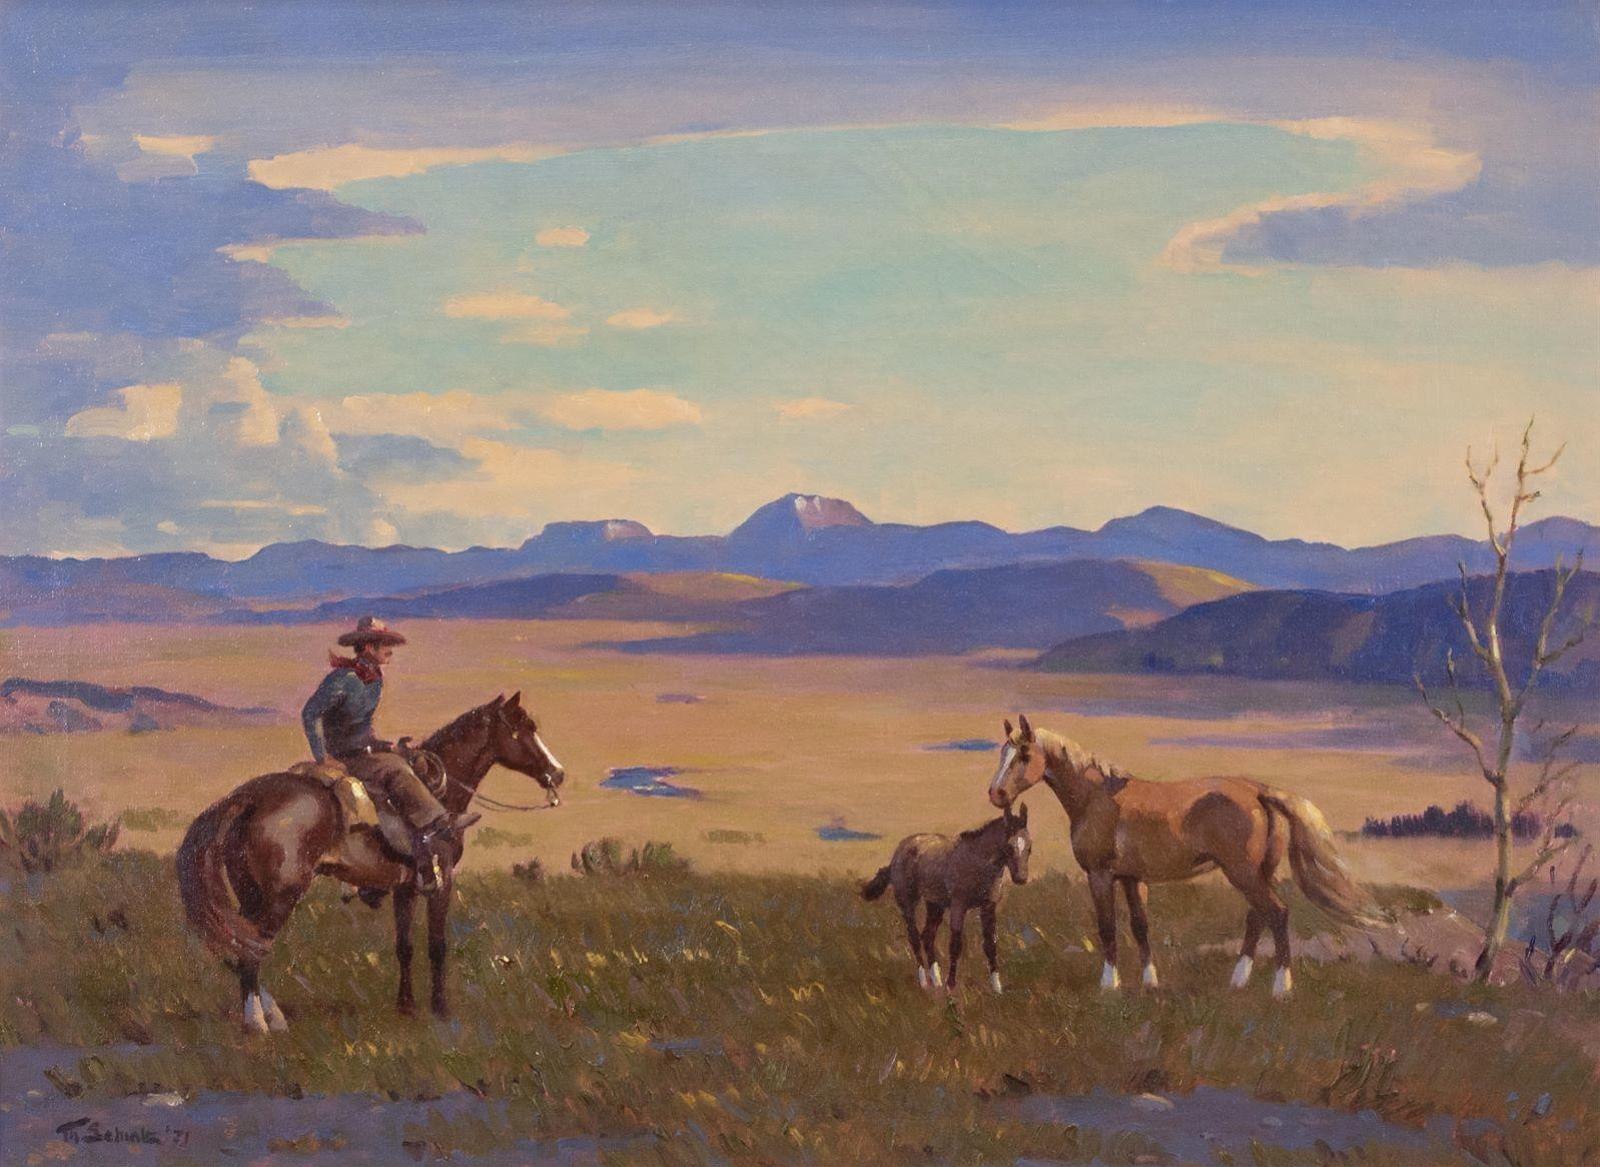 Theodor Marie Ted Schintz (1904-1975) - Cowboy With Horses On The Open Range; 1971